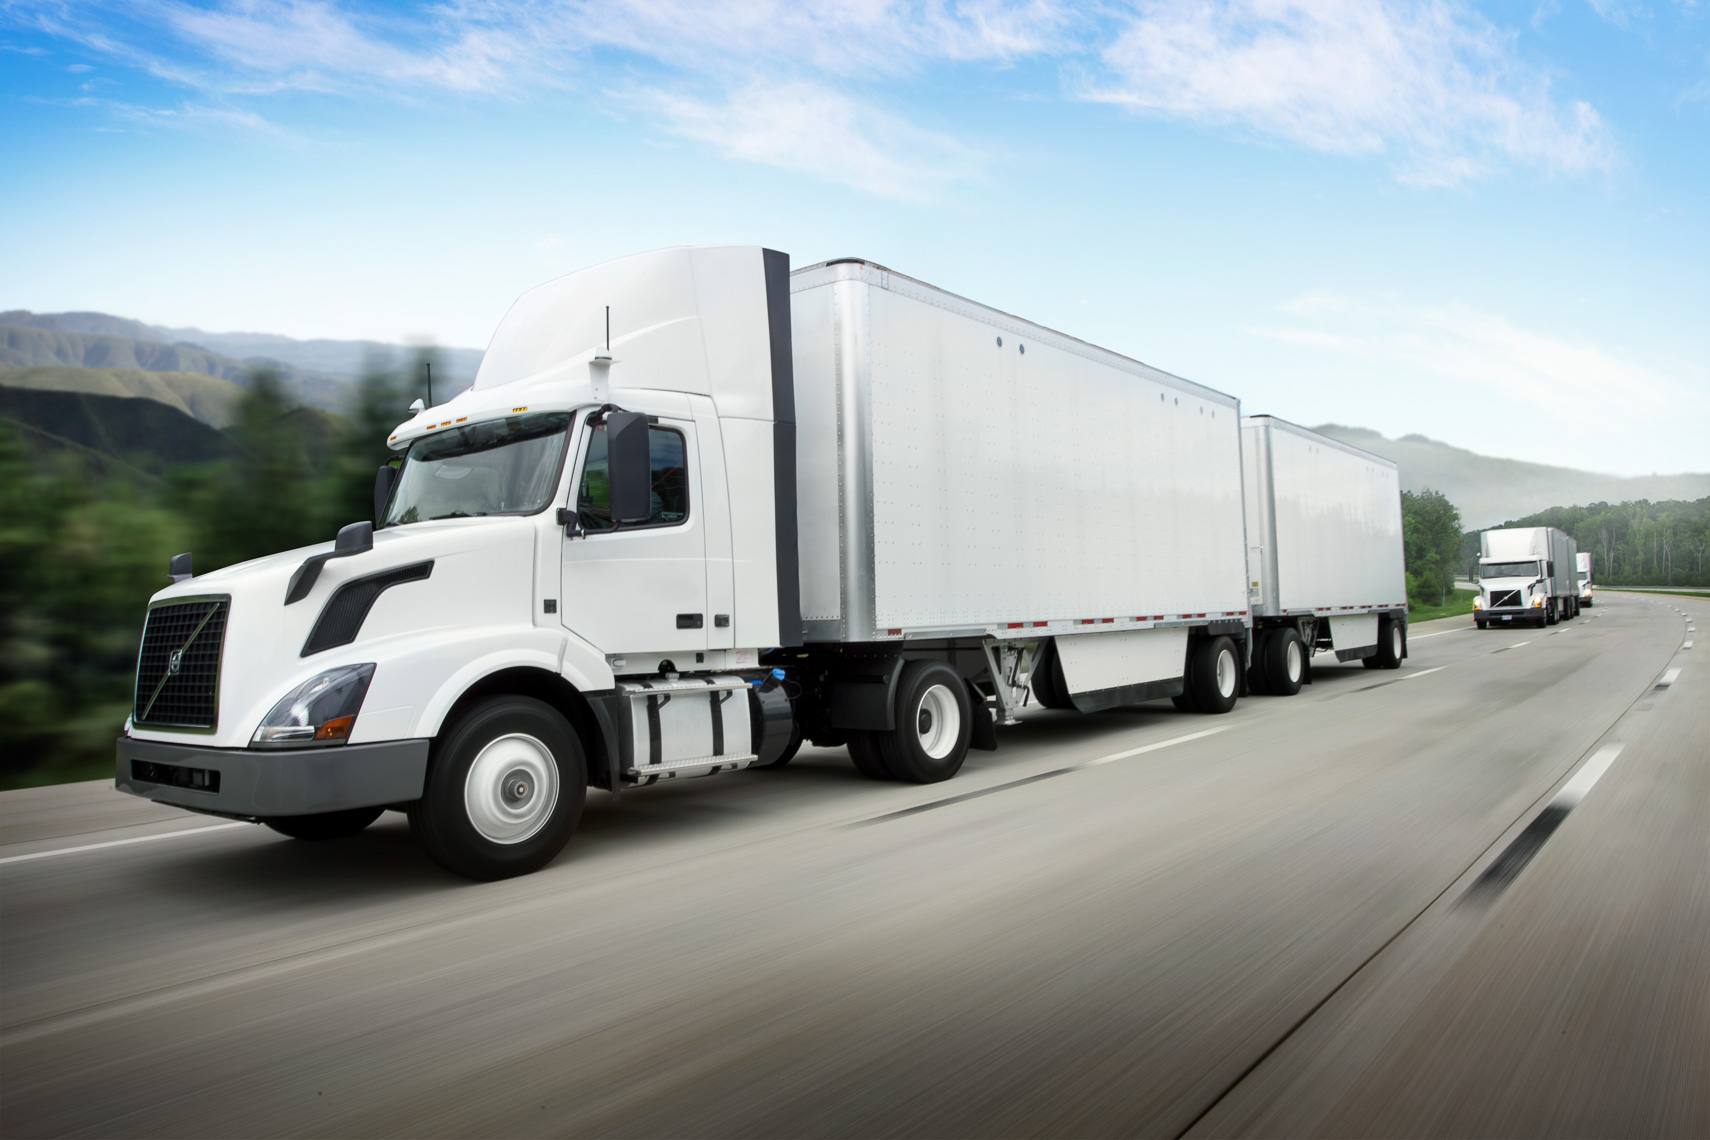 Volvo Trucks and FedEx Successfully Demonstrate Truck Platooning on NC 540 (Triangle Expressway)